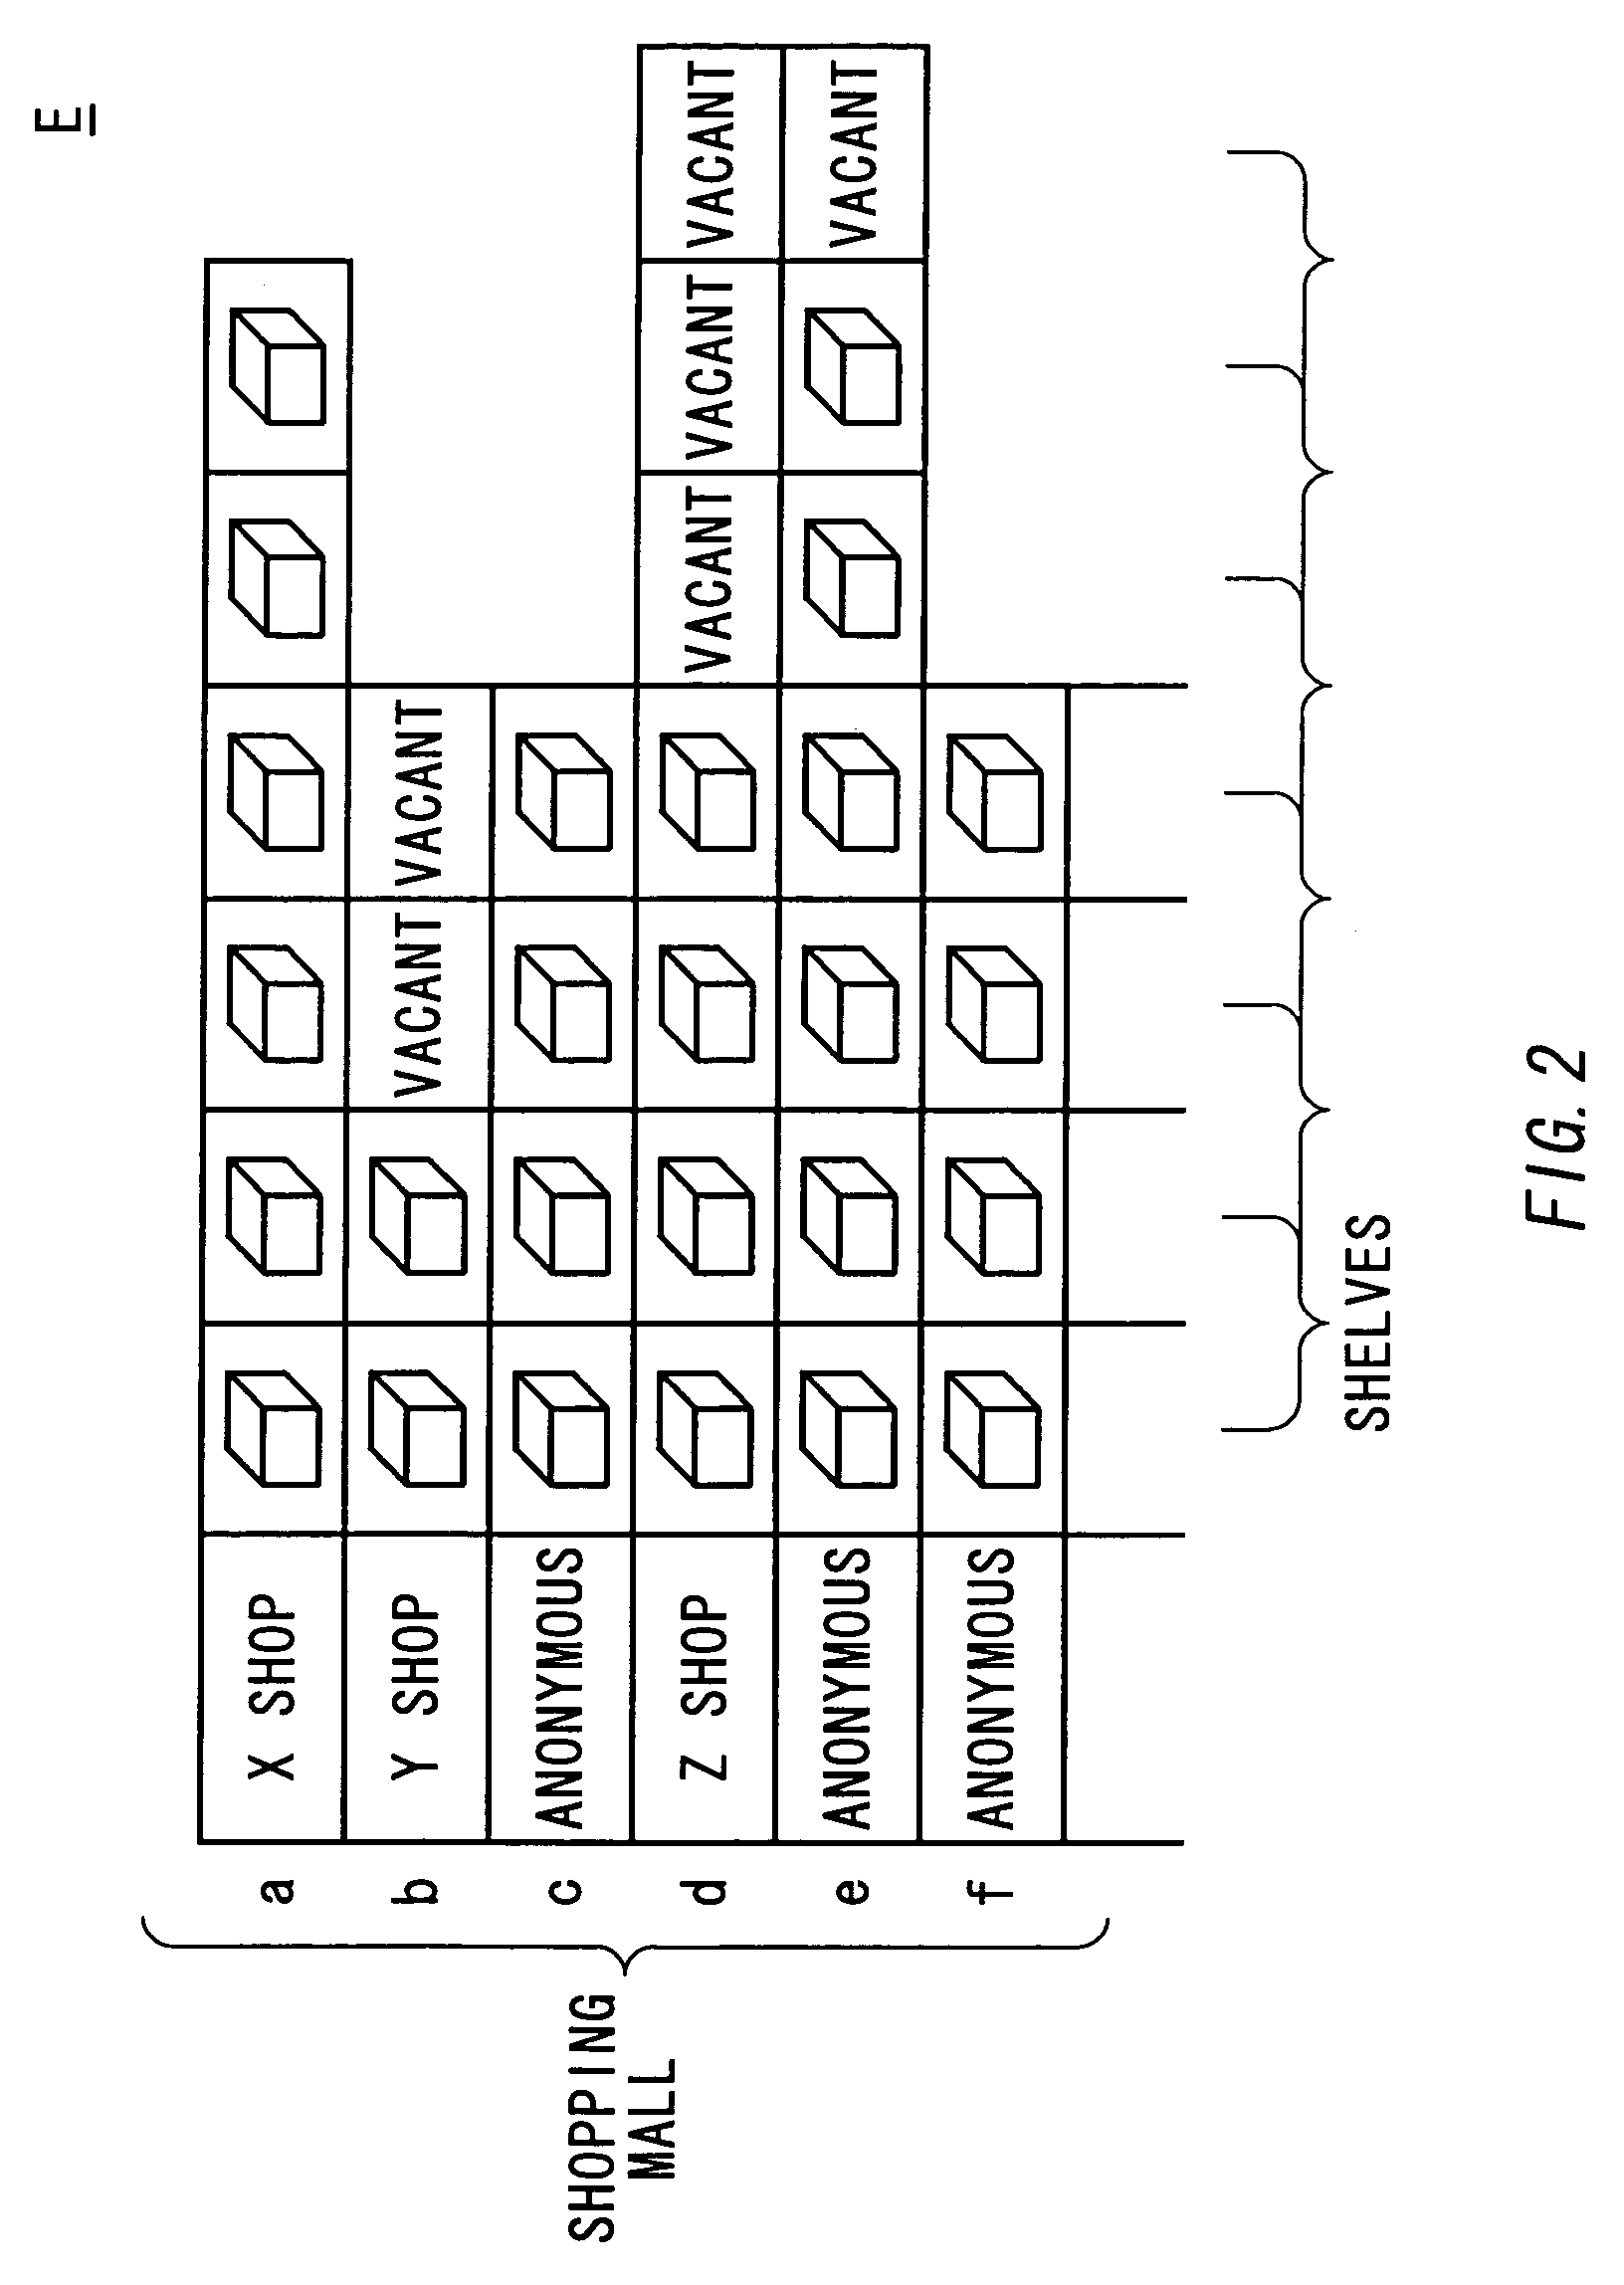 Method and system for operating a virtual shopping mall or seller-engaged type